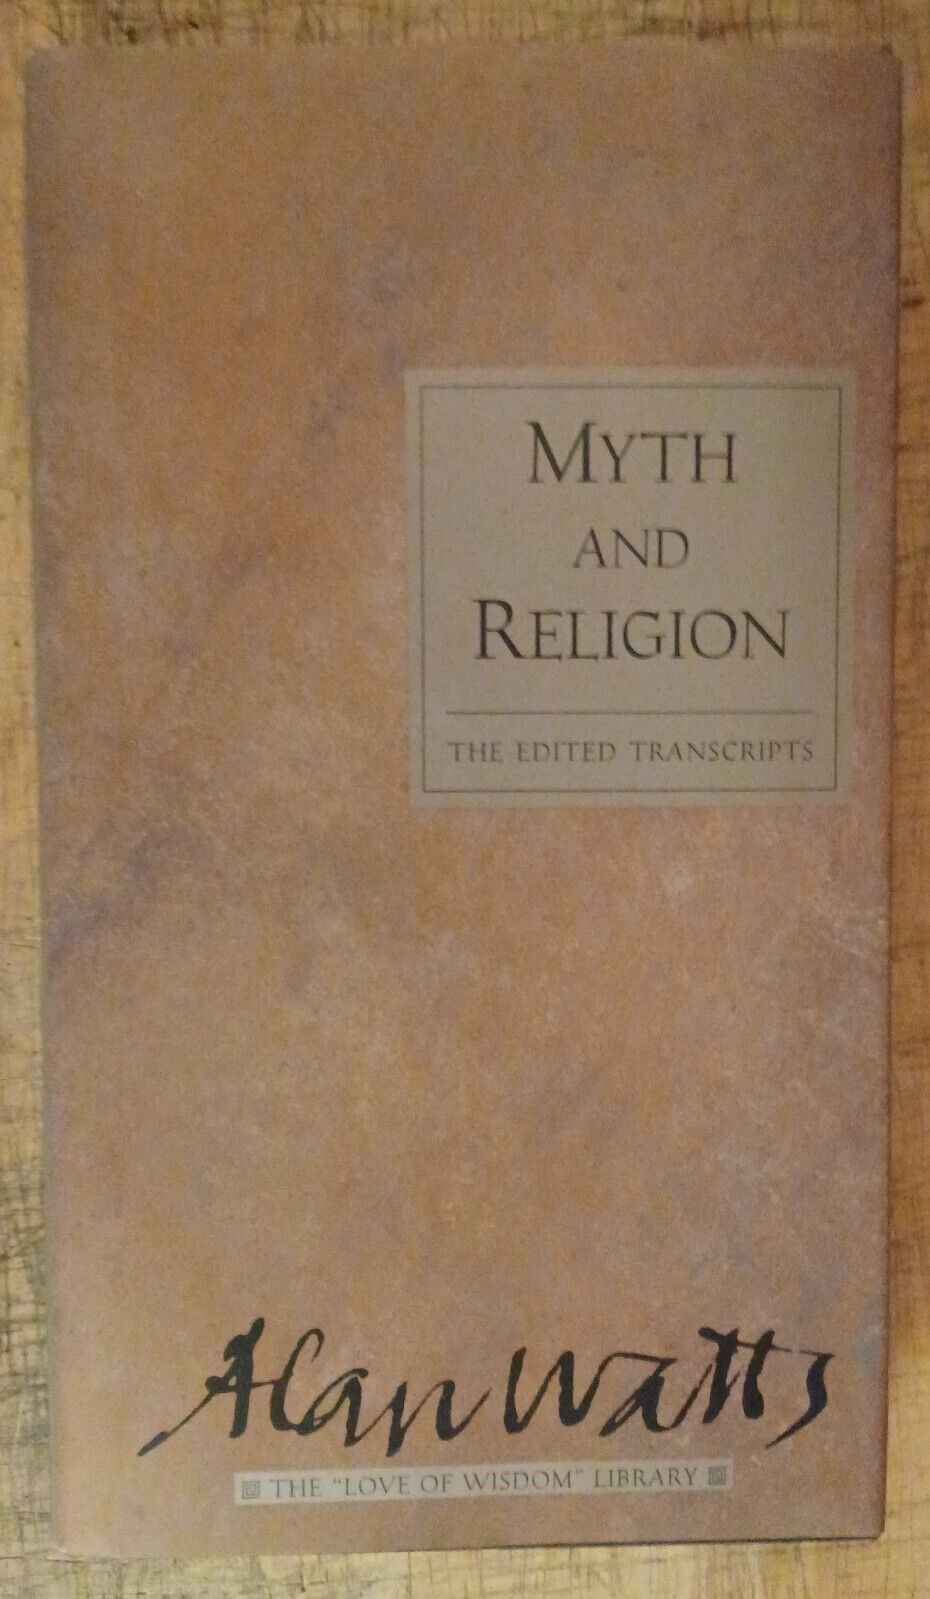 Myth and Religion: The Edited Transcripts